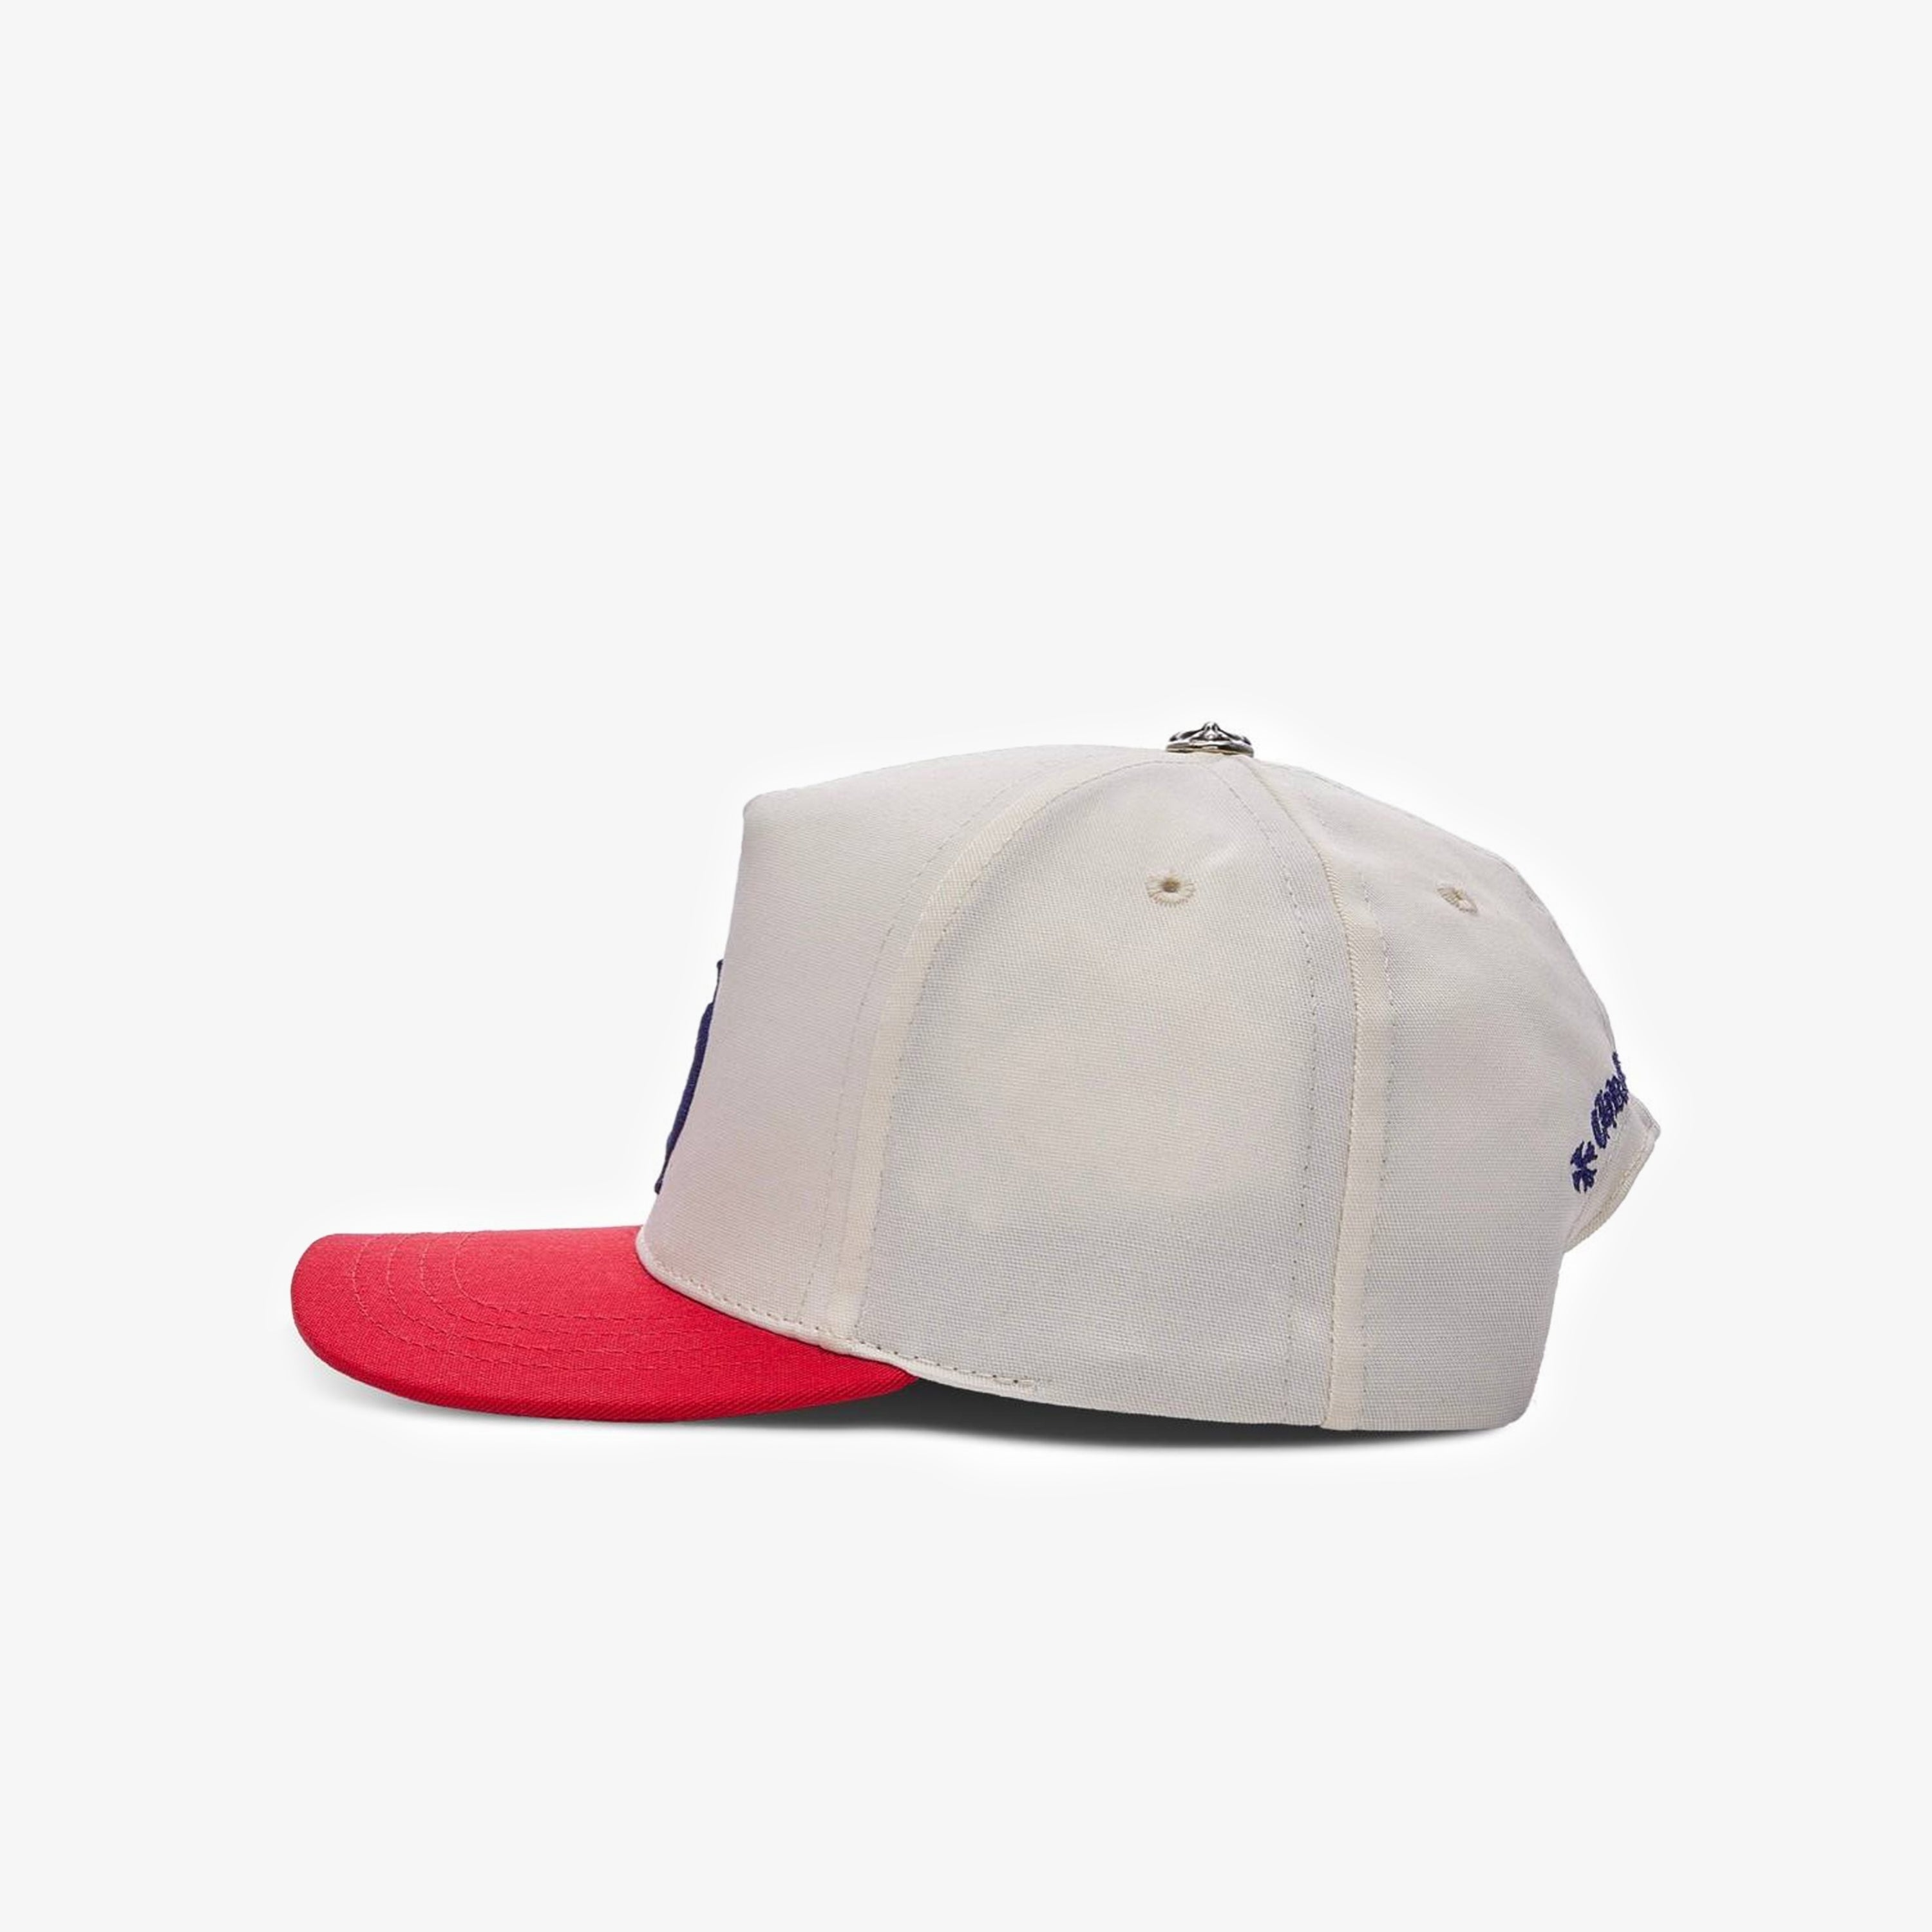 4TH OF JULY EXCLUSIVE BASEBALL HAT